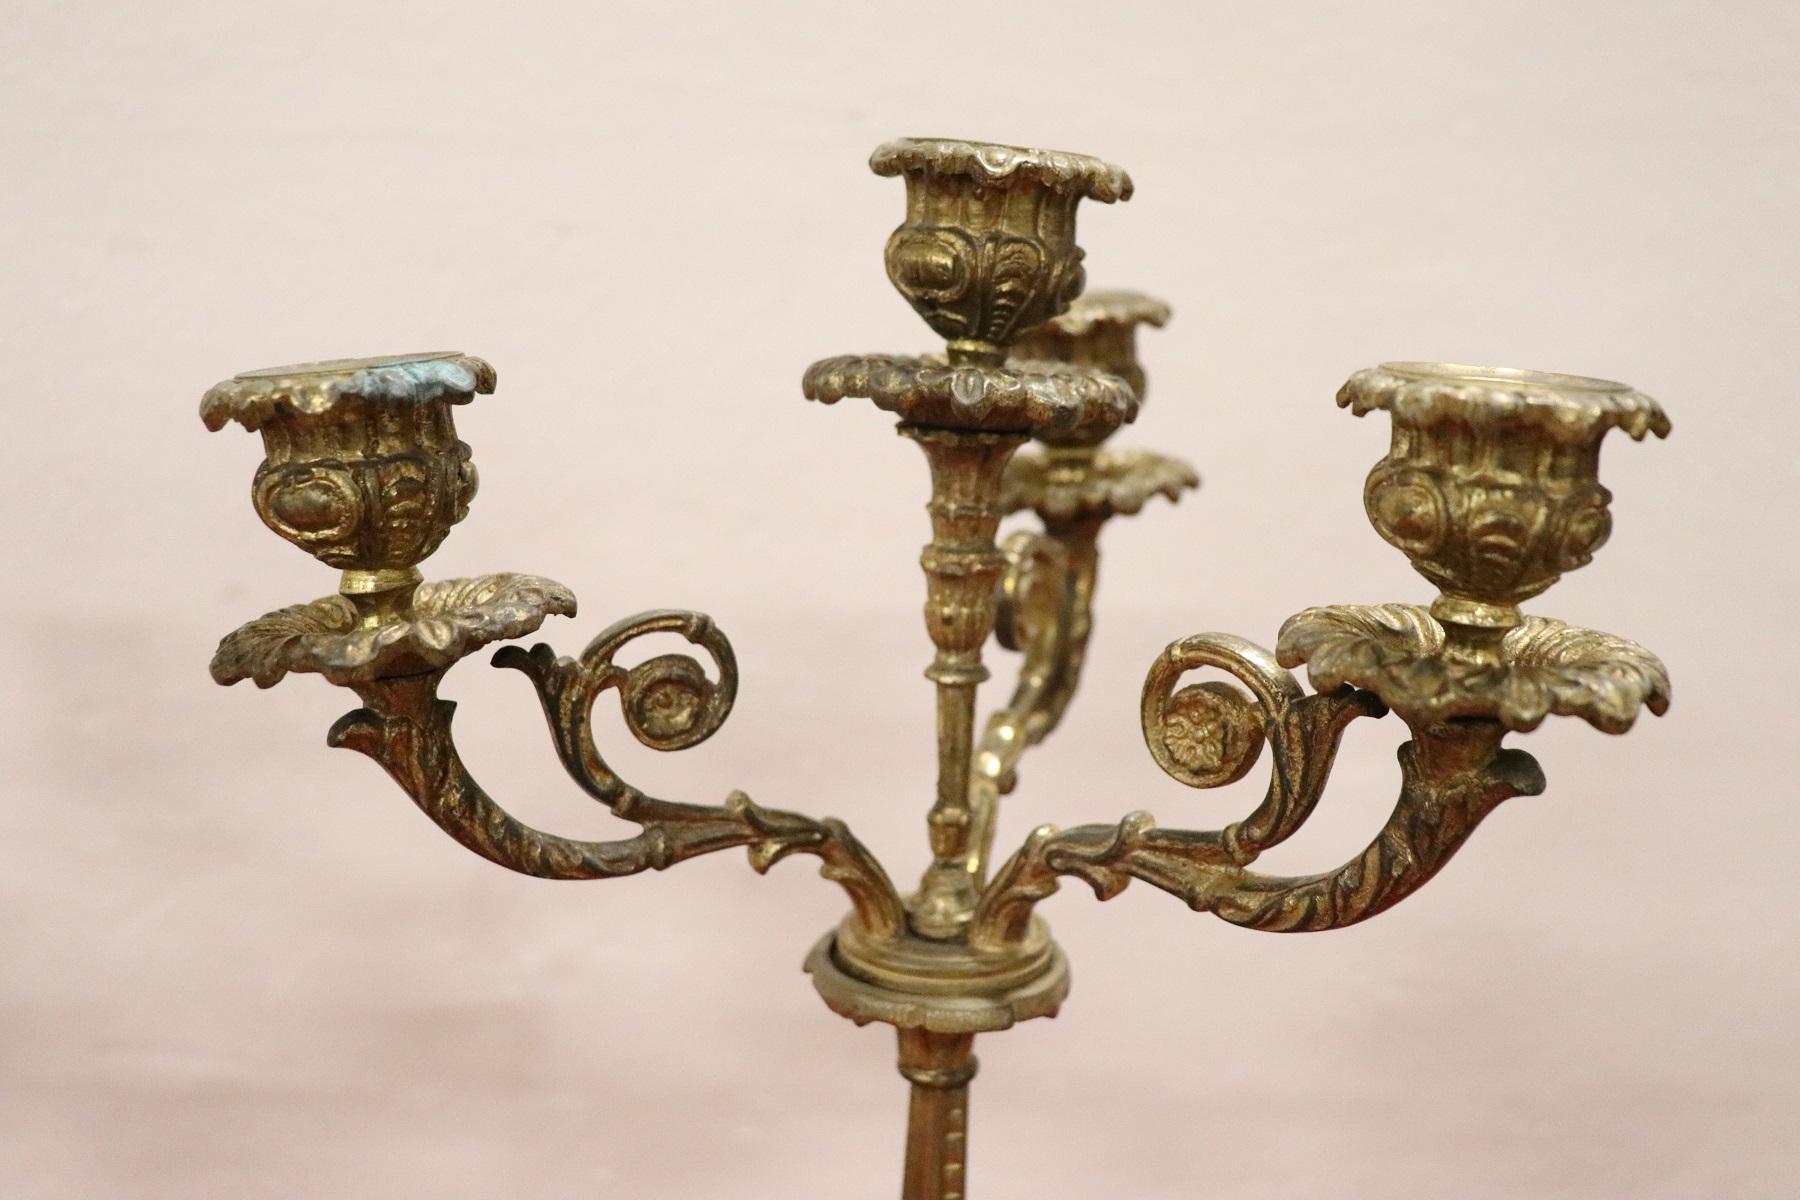 19th Century French Napoleon III Pair of Candelabras in Gilded Bronze 4 Arms 3